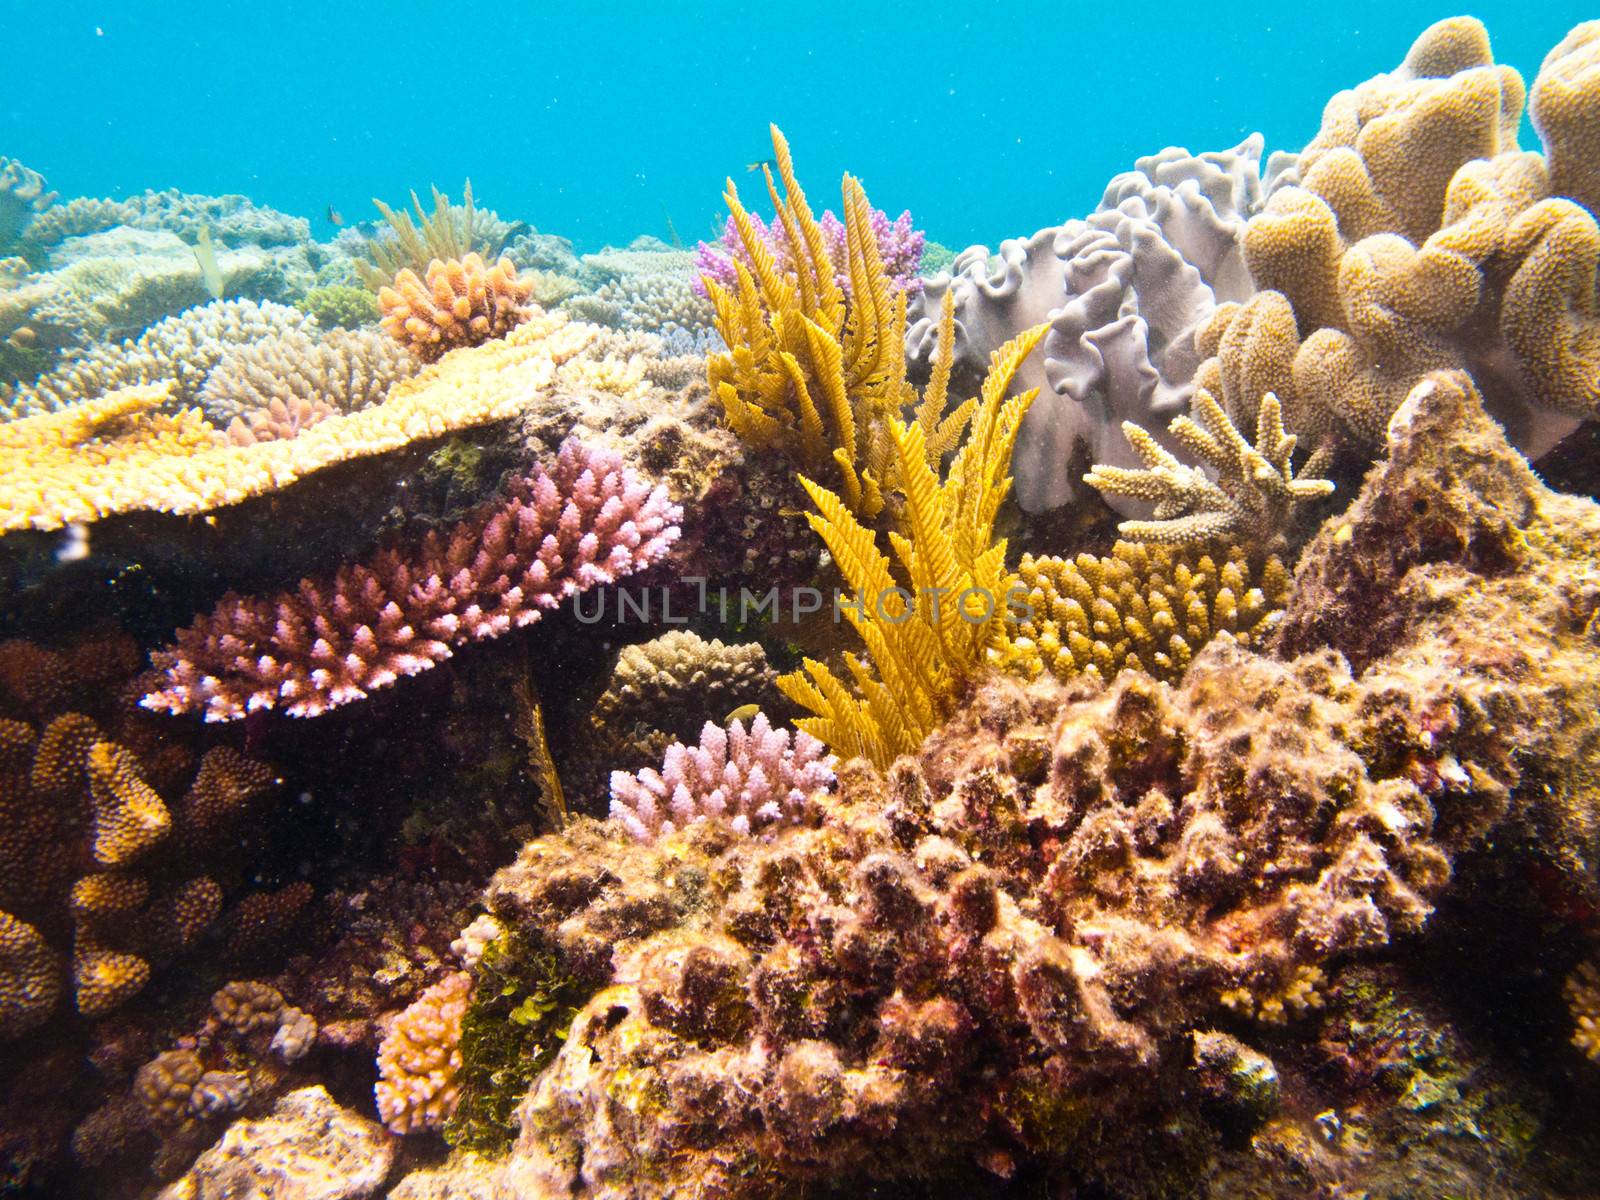 View underwater shot of the coral reef by jrstock